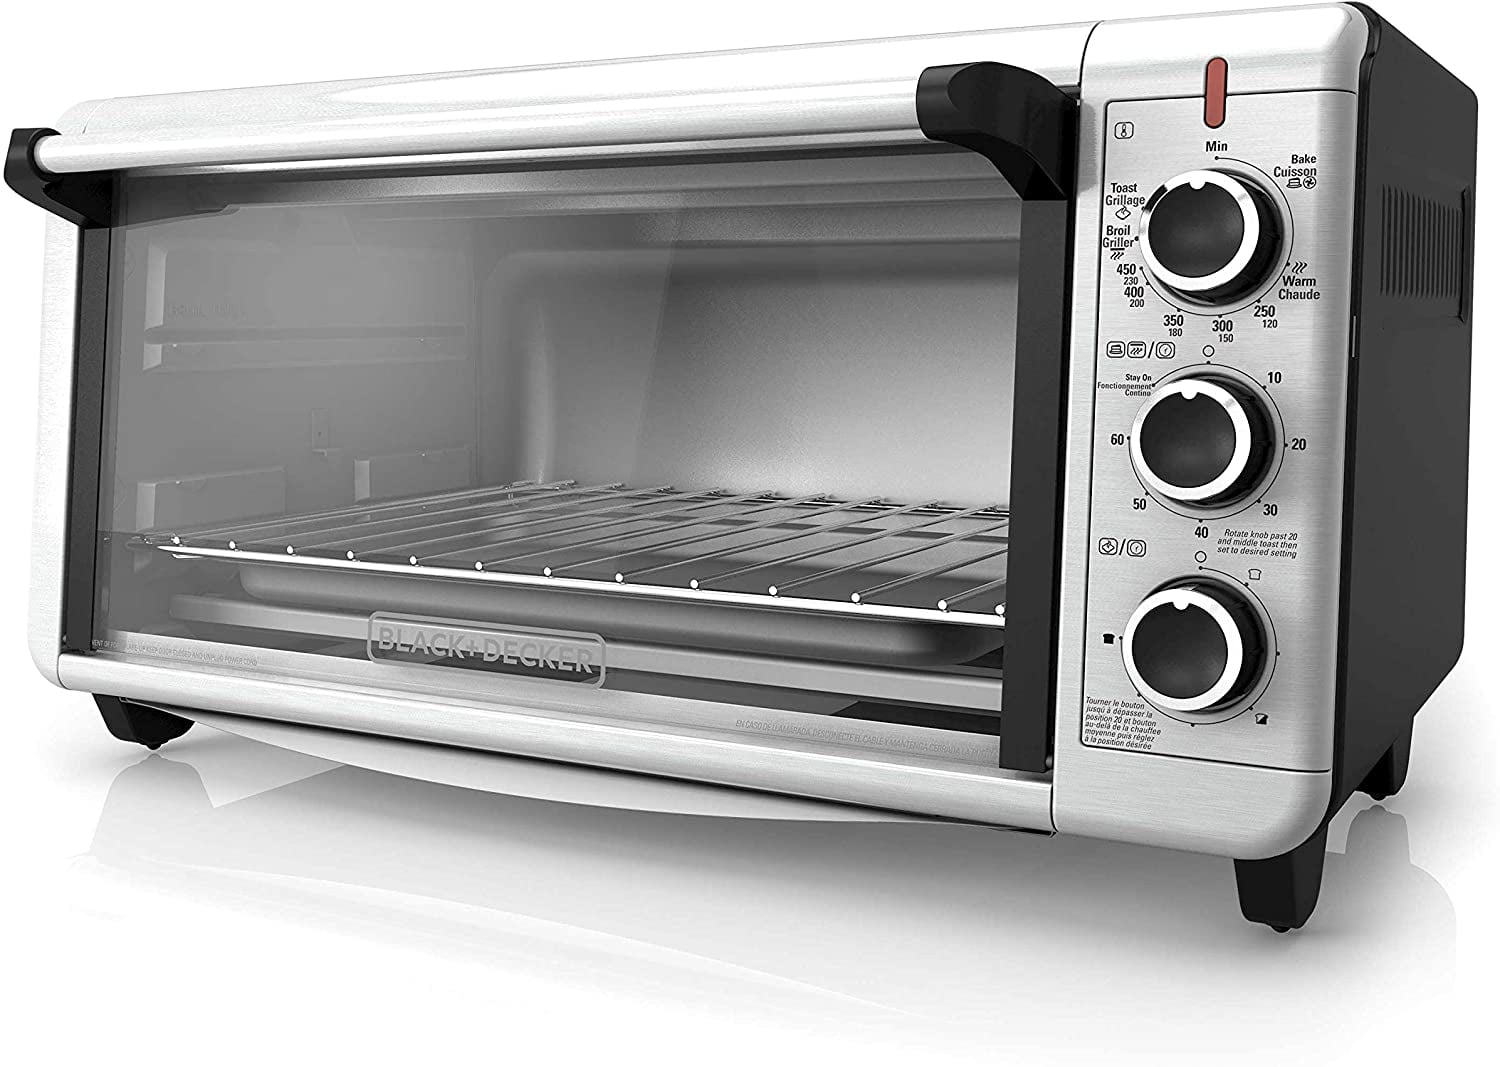 Black & Decker TO3250XSB 8-Slice Extra Wide Convection Countertop Toaster Oven, Includes Bake Pan, Broil Rack & Toasting Rack, Stainless Steel/Black